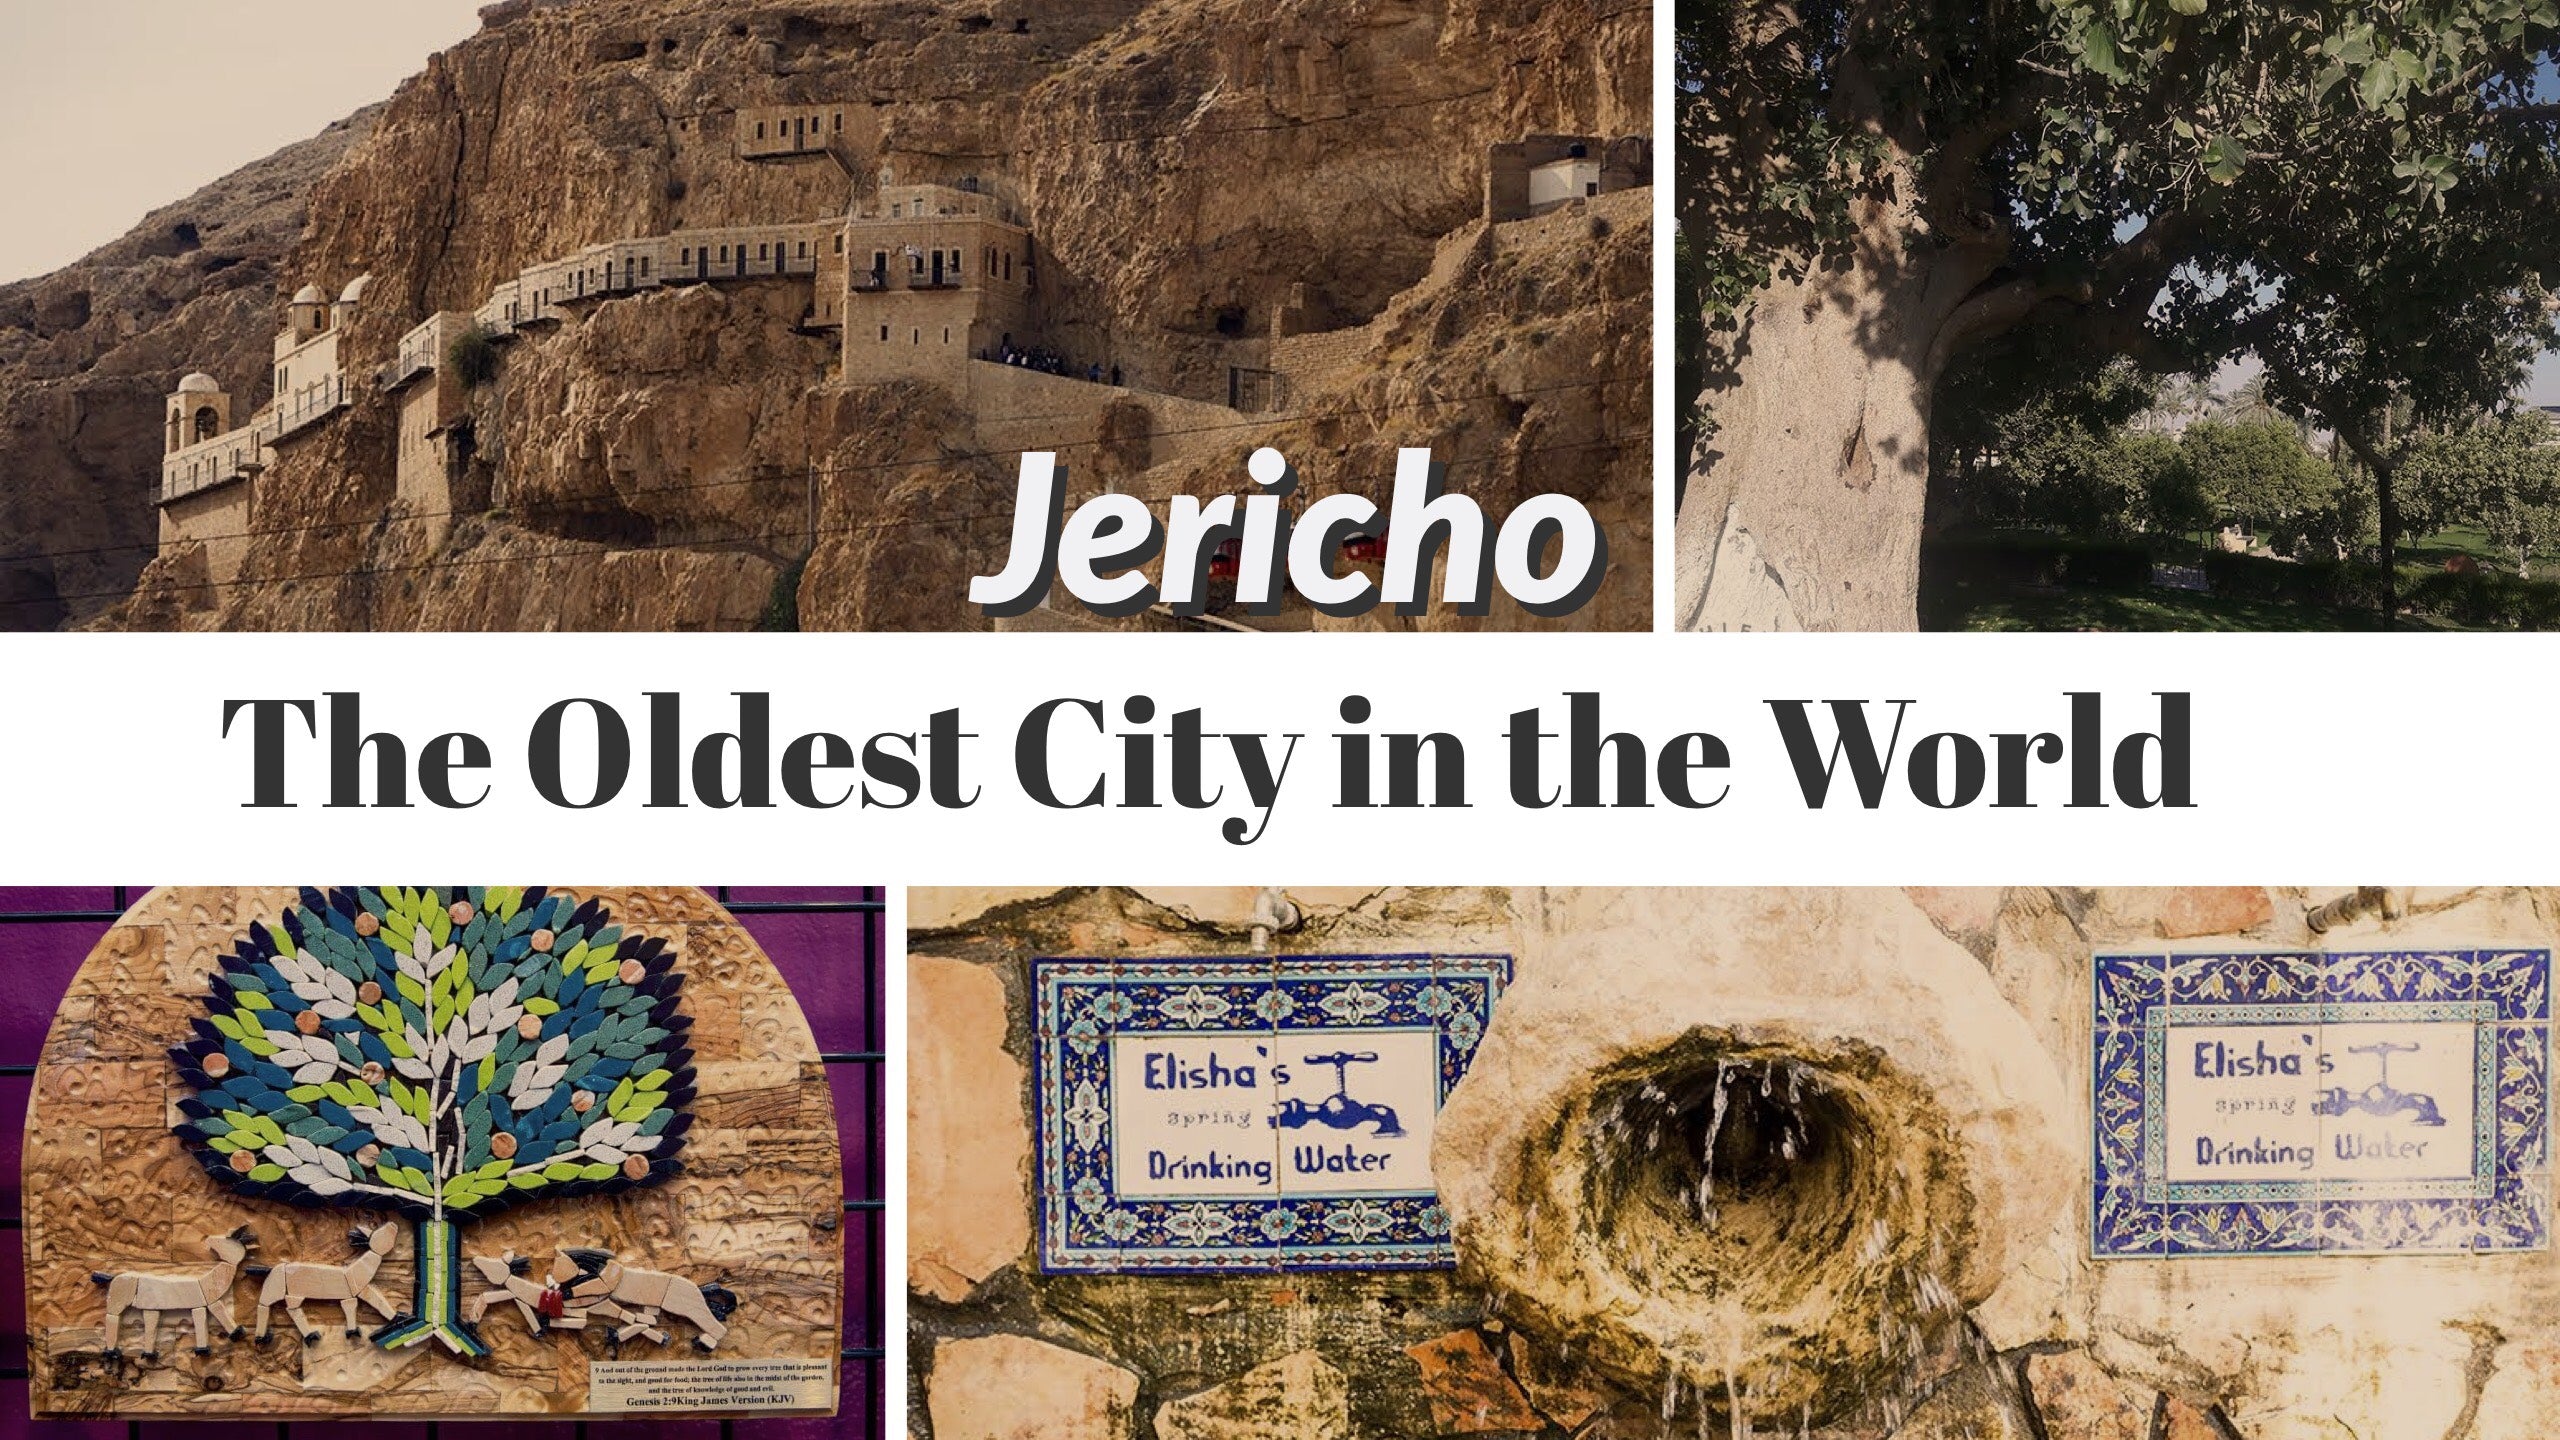 Jericho: The Oldest City in the World